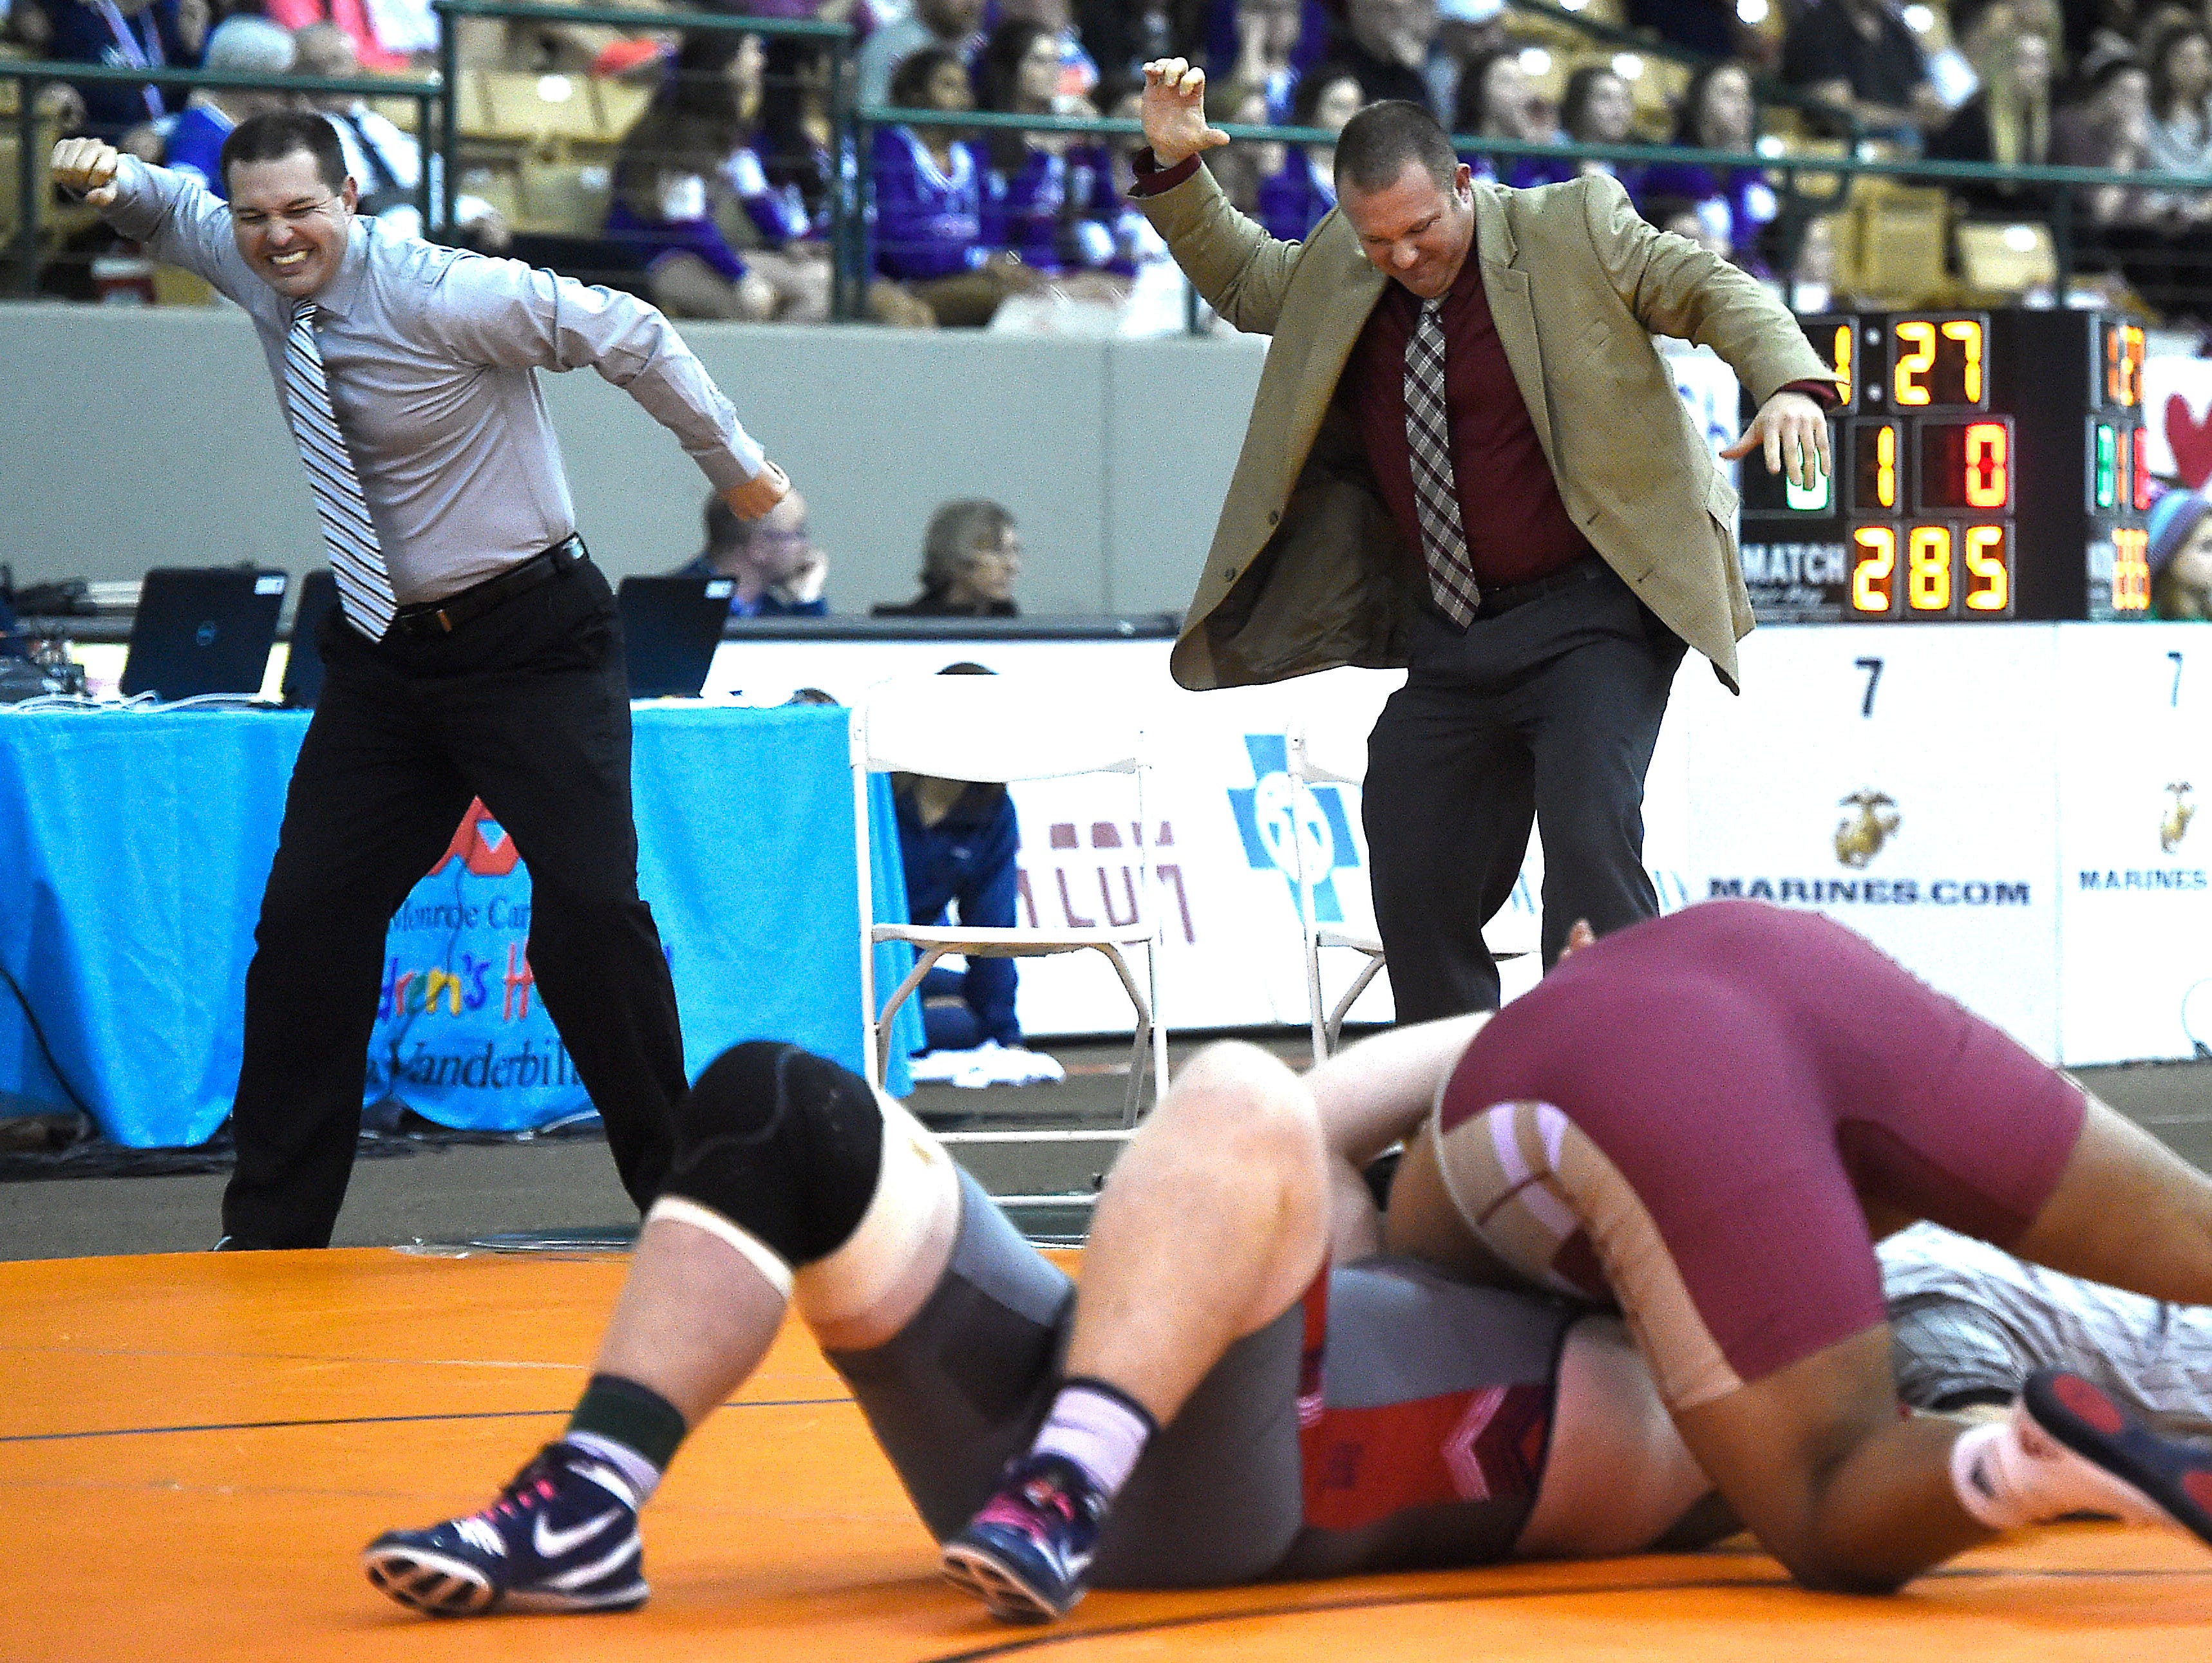 Riverdale coaches including Shawn Jones, right, celebrate before the pin is finished as they knew Nick Boykin (Riverdale) was going to defeat Logan Townsend (Jefferson Co.) at the TSSAA state wrestling championships Saturday Feb. 20, 2016, in Franklin, Tenn.